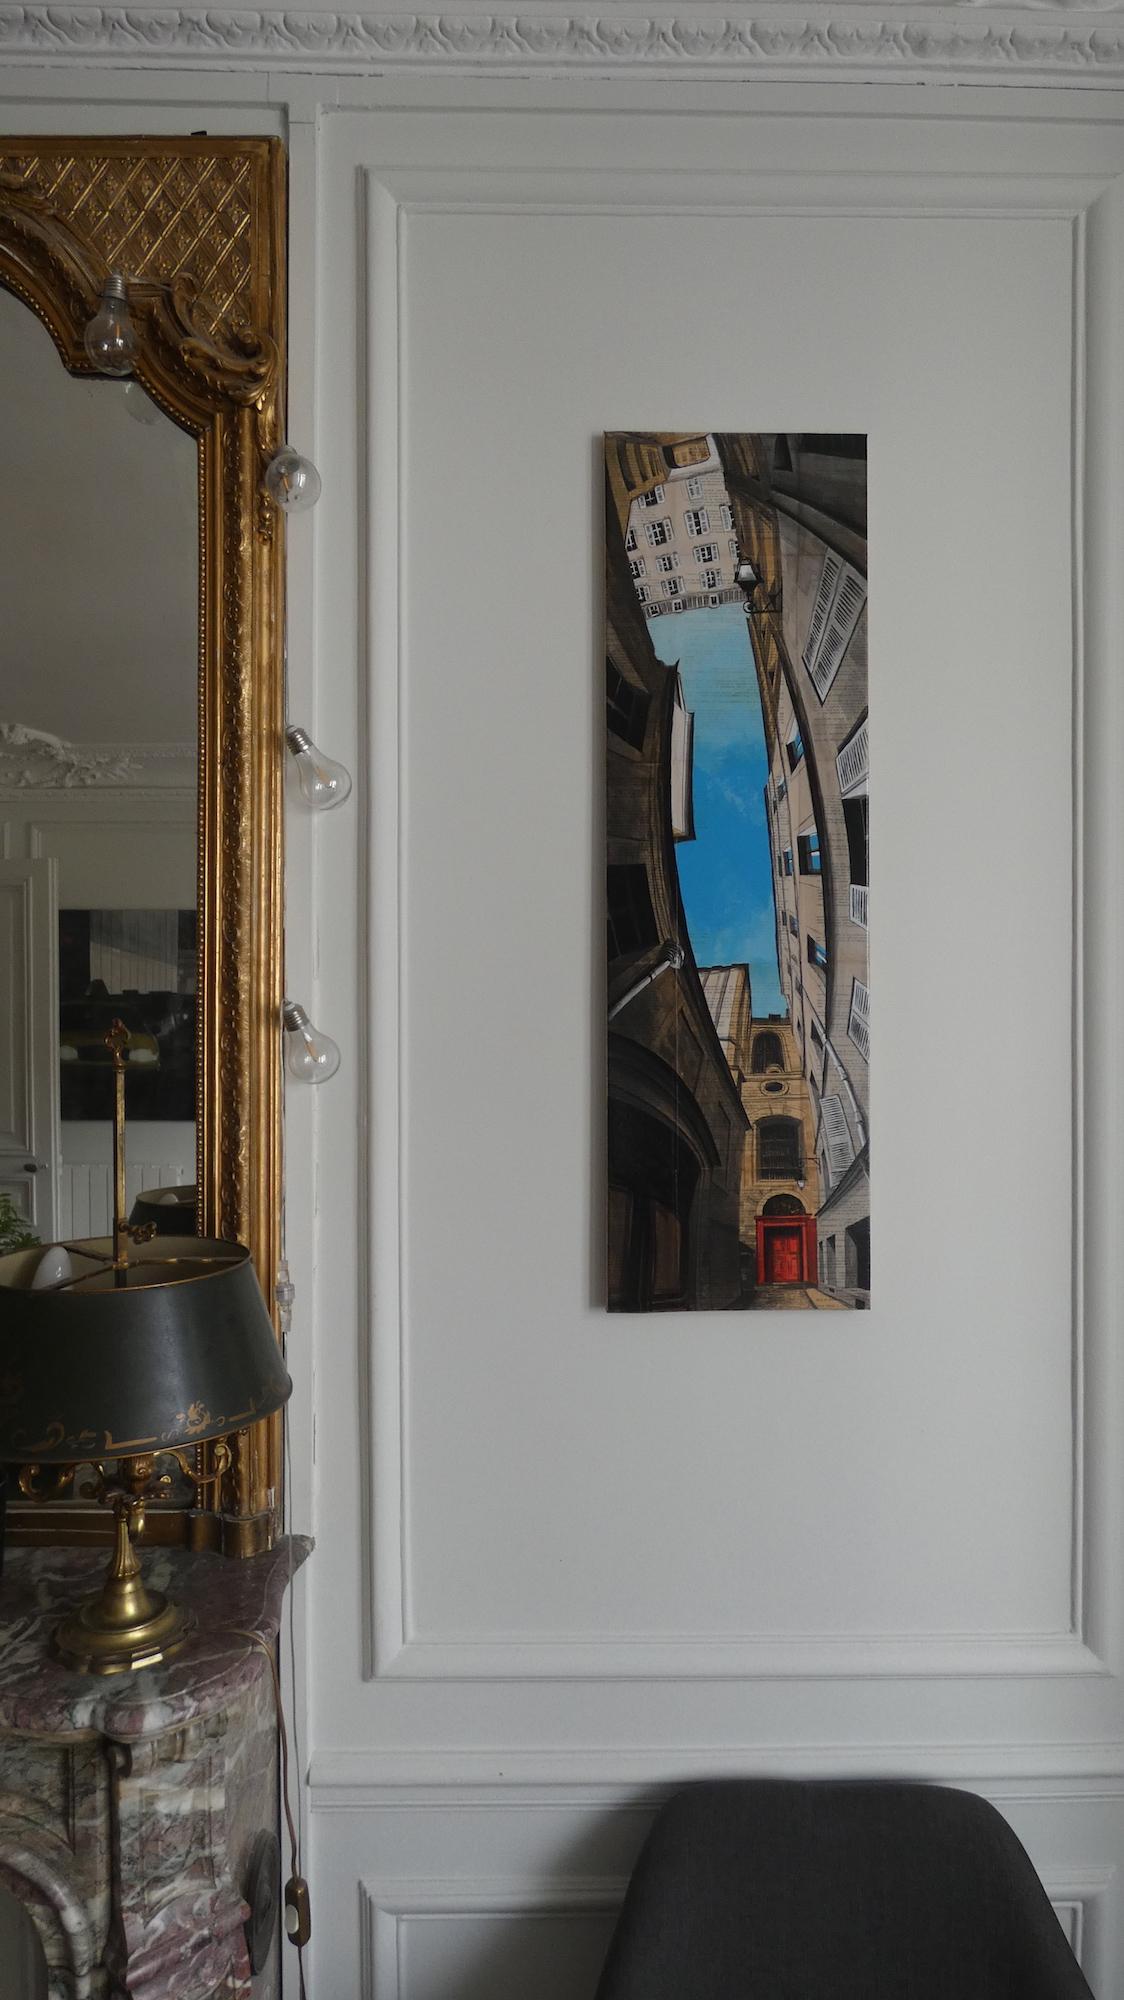 Near Charlemagne by Guillaume Chansarel - Urban landscape painting, Paris - Contemporary Painting by Guillaume Chansarel (Guiyome)